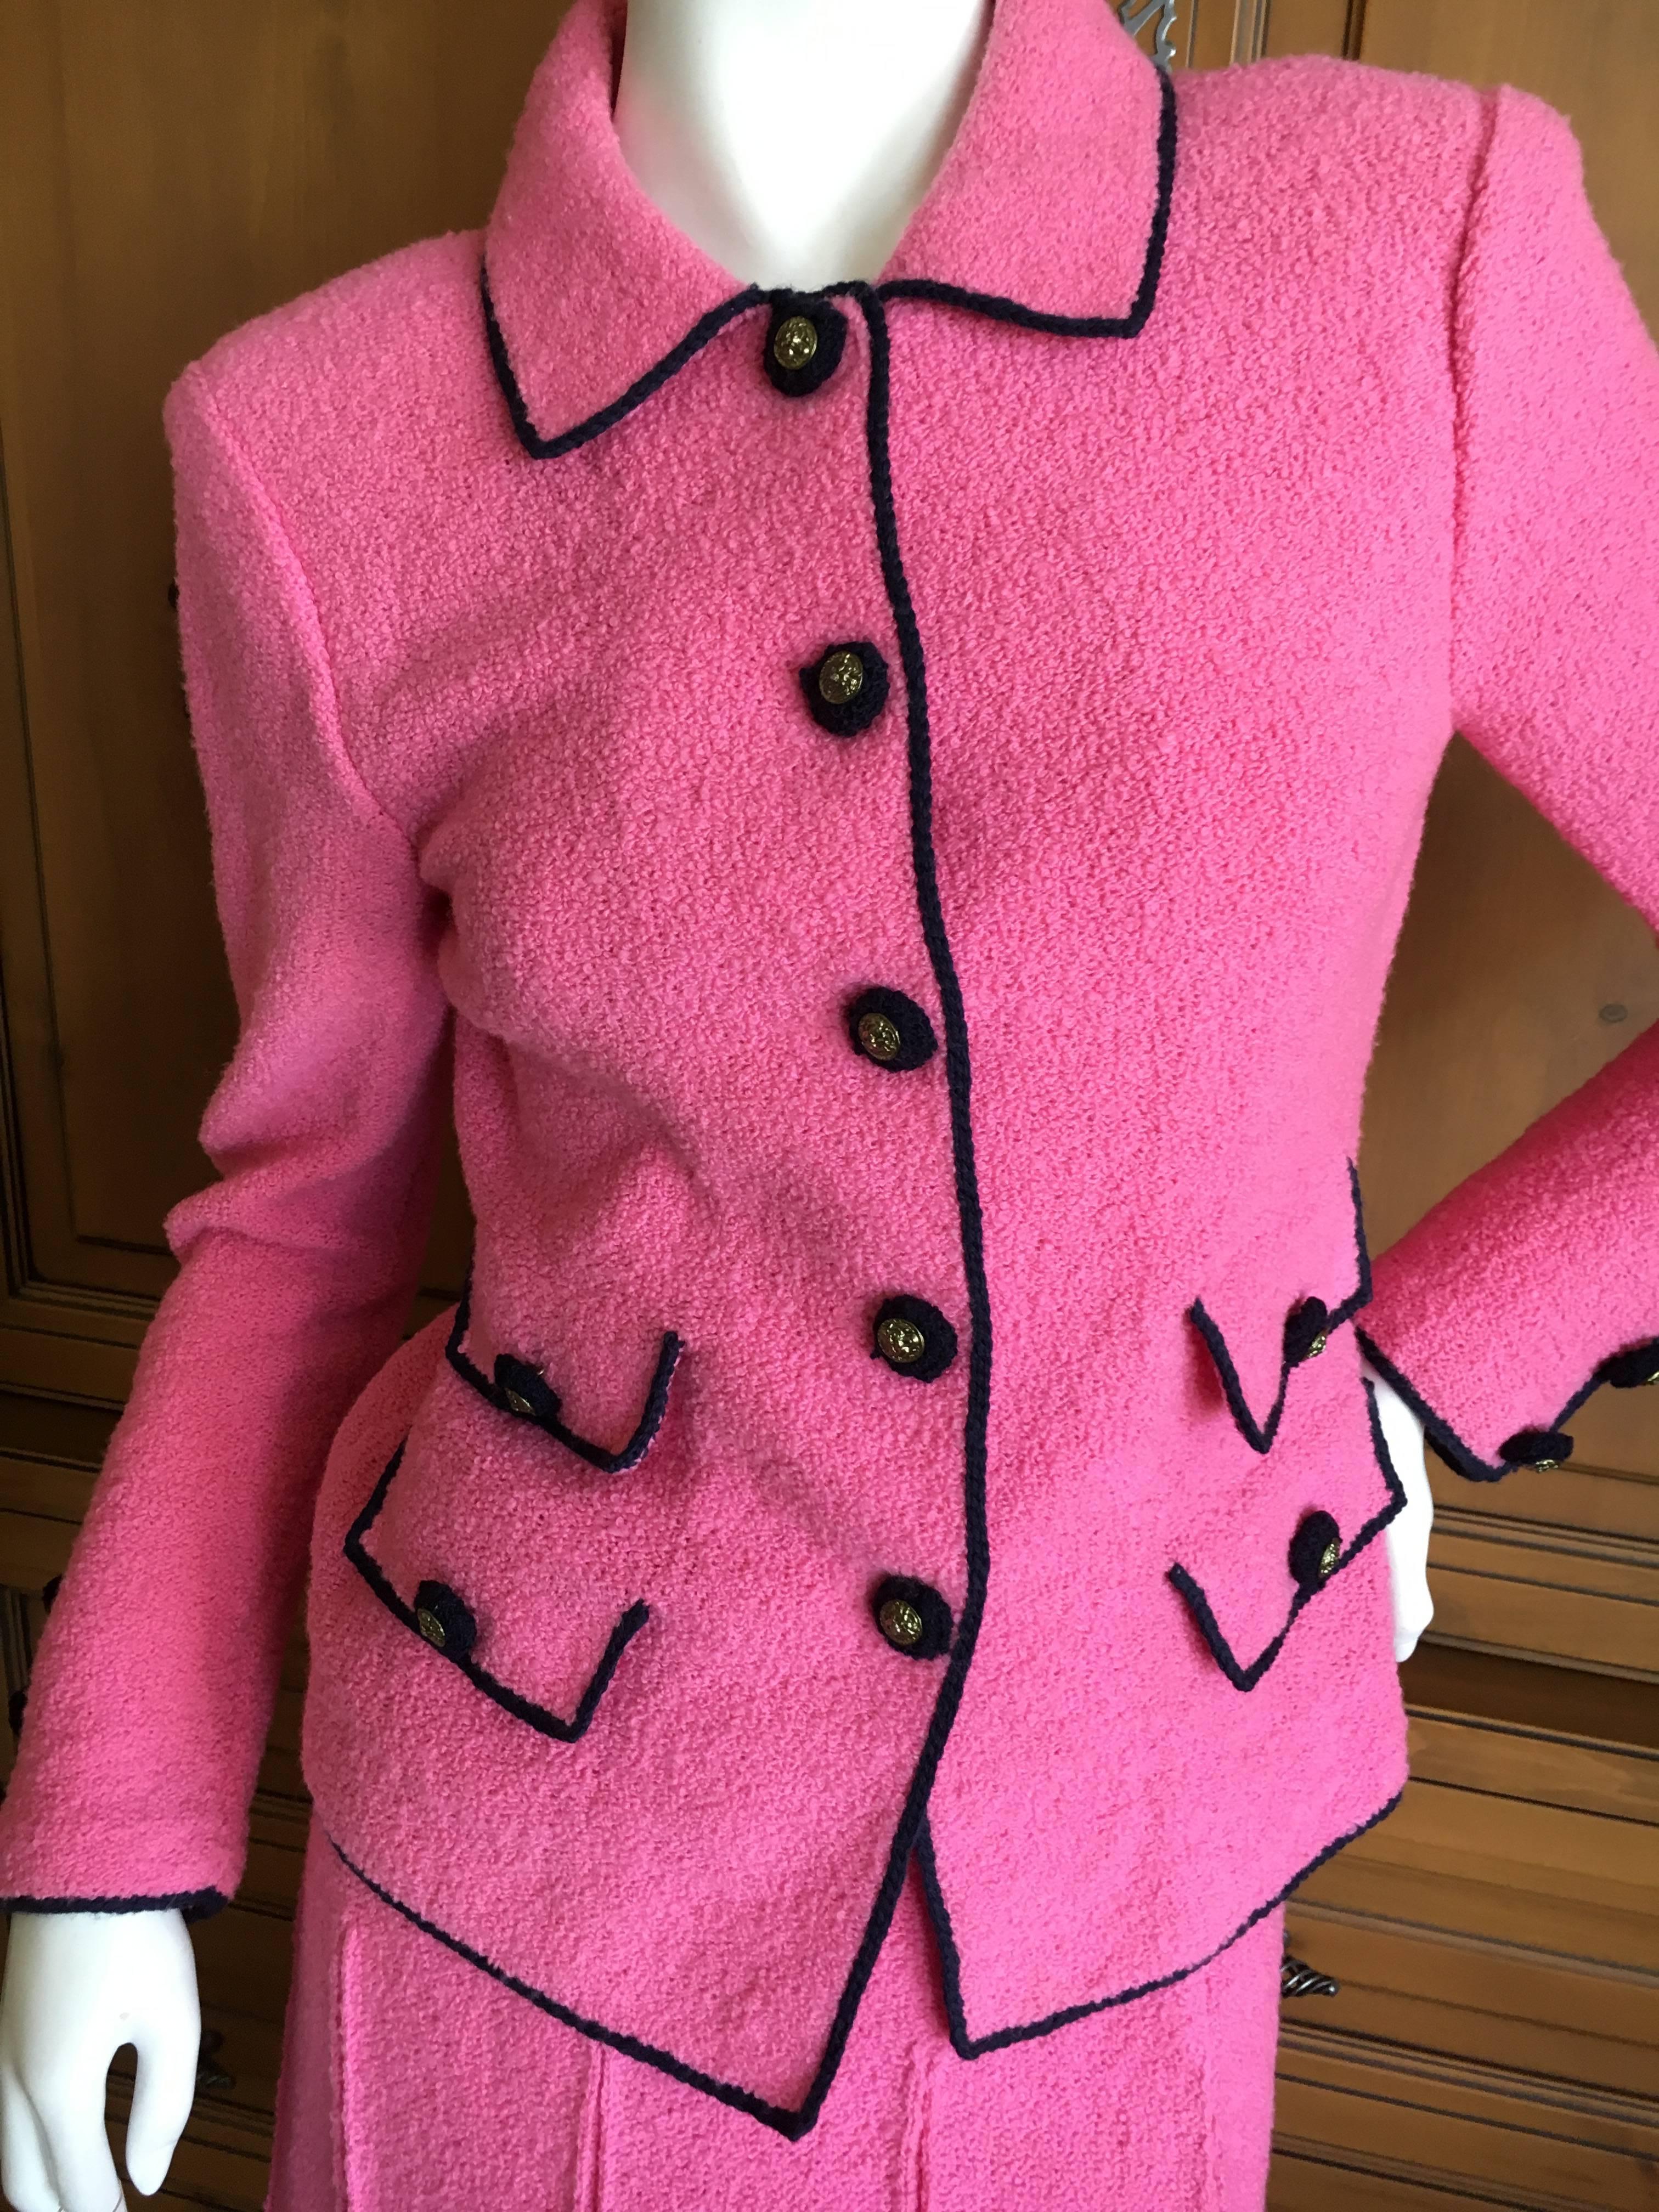 Adolfo 1980 Pink Knit Suit In Excellent Condition For Sale In Cloverdale, CA